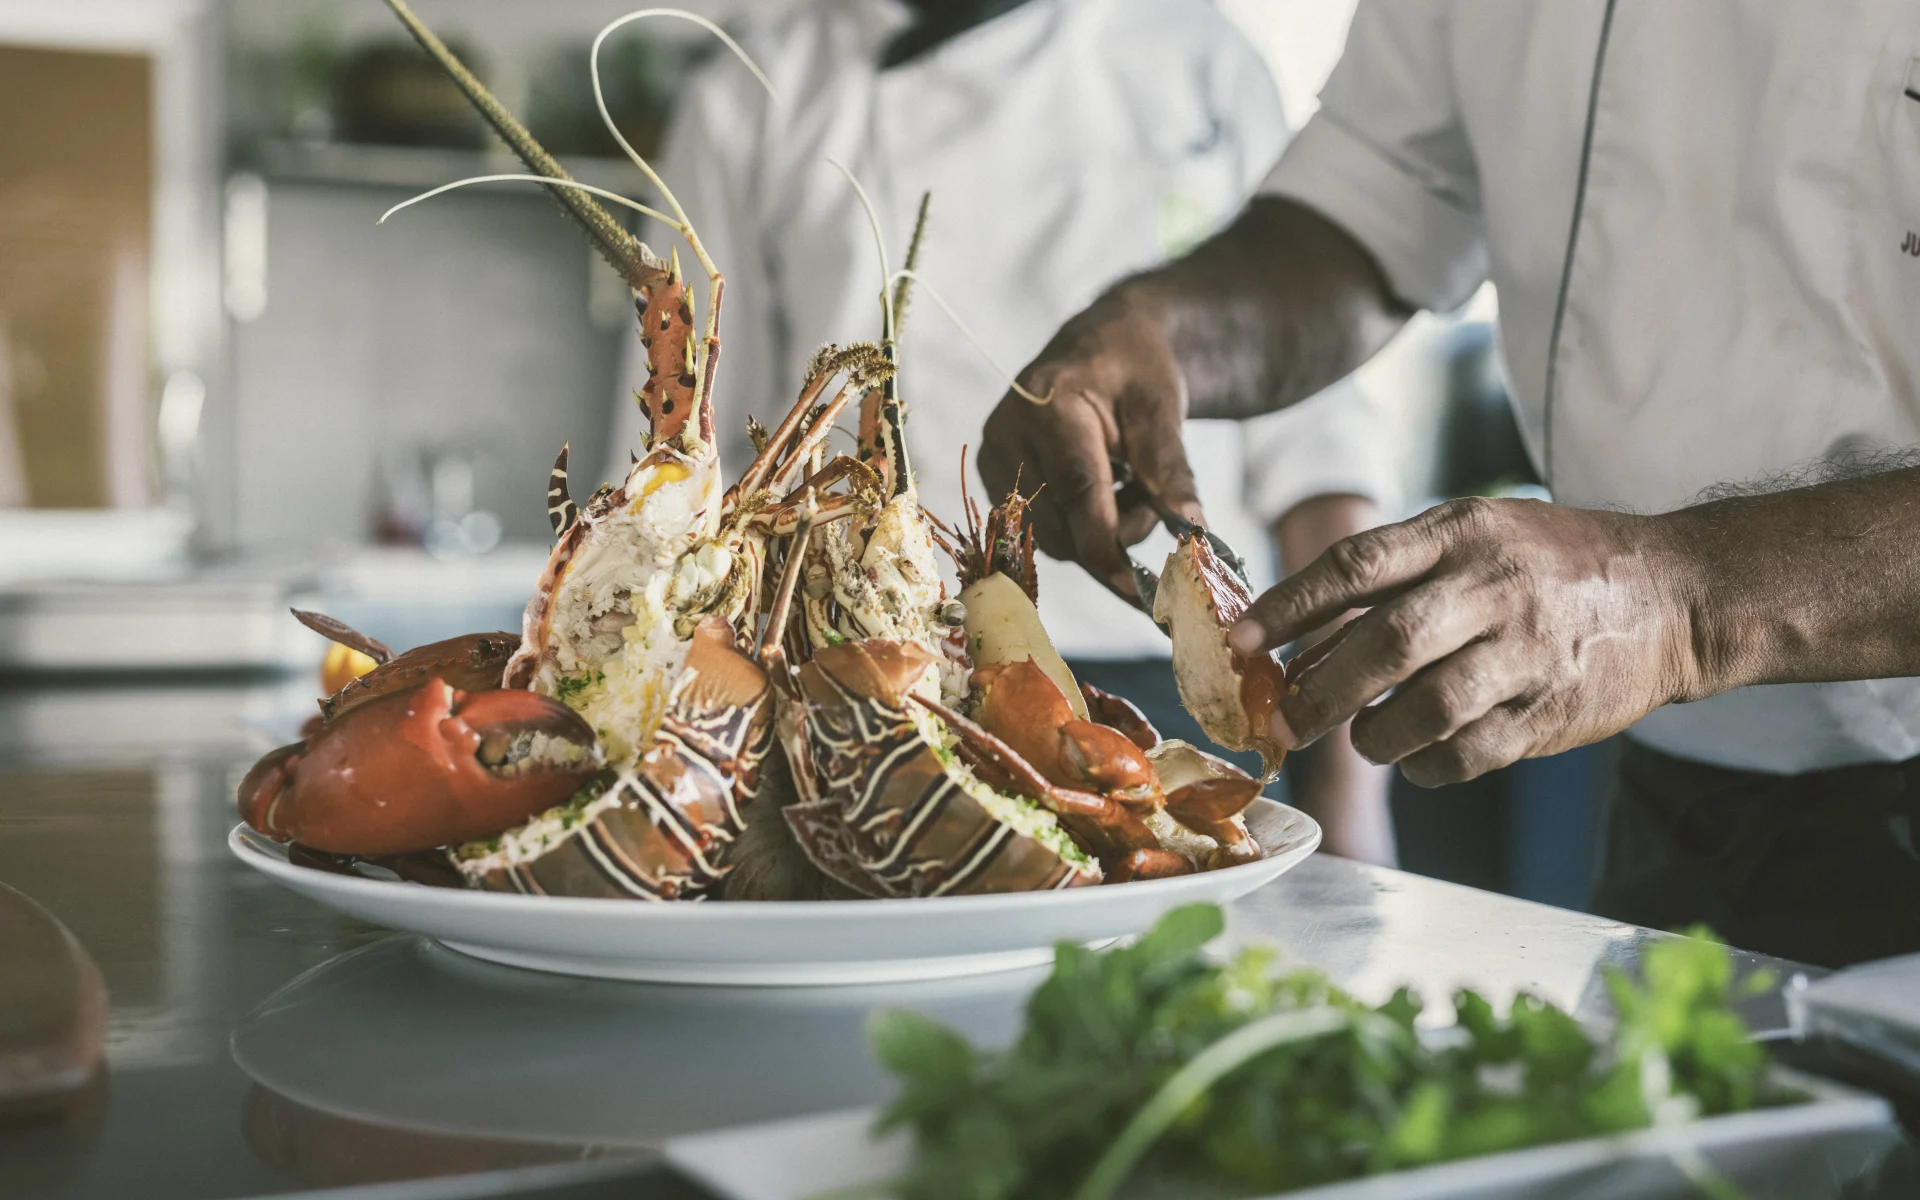 A well-presented dish of fresh lobster is being carefully prepared by the hotel chef.